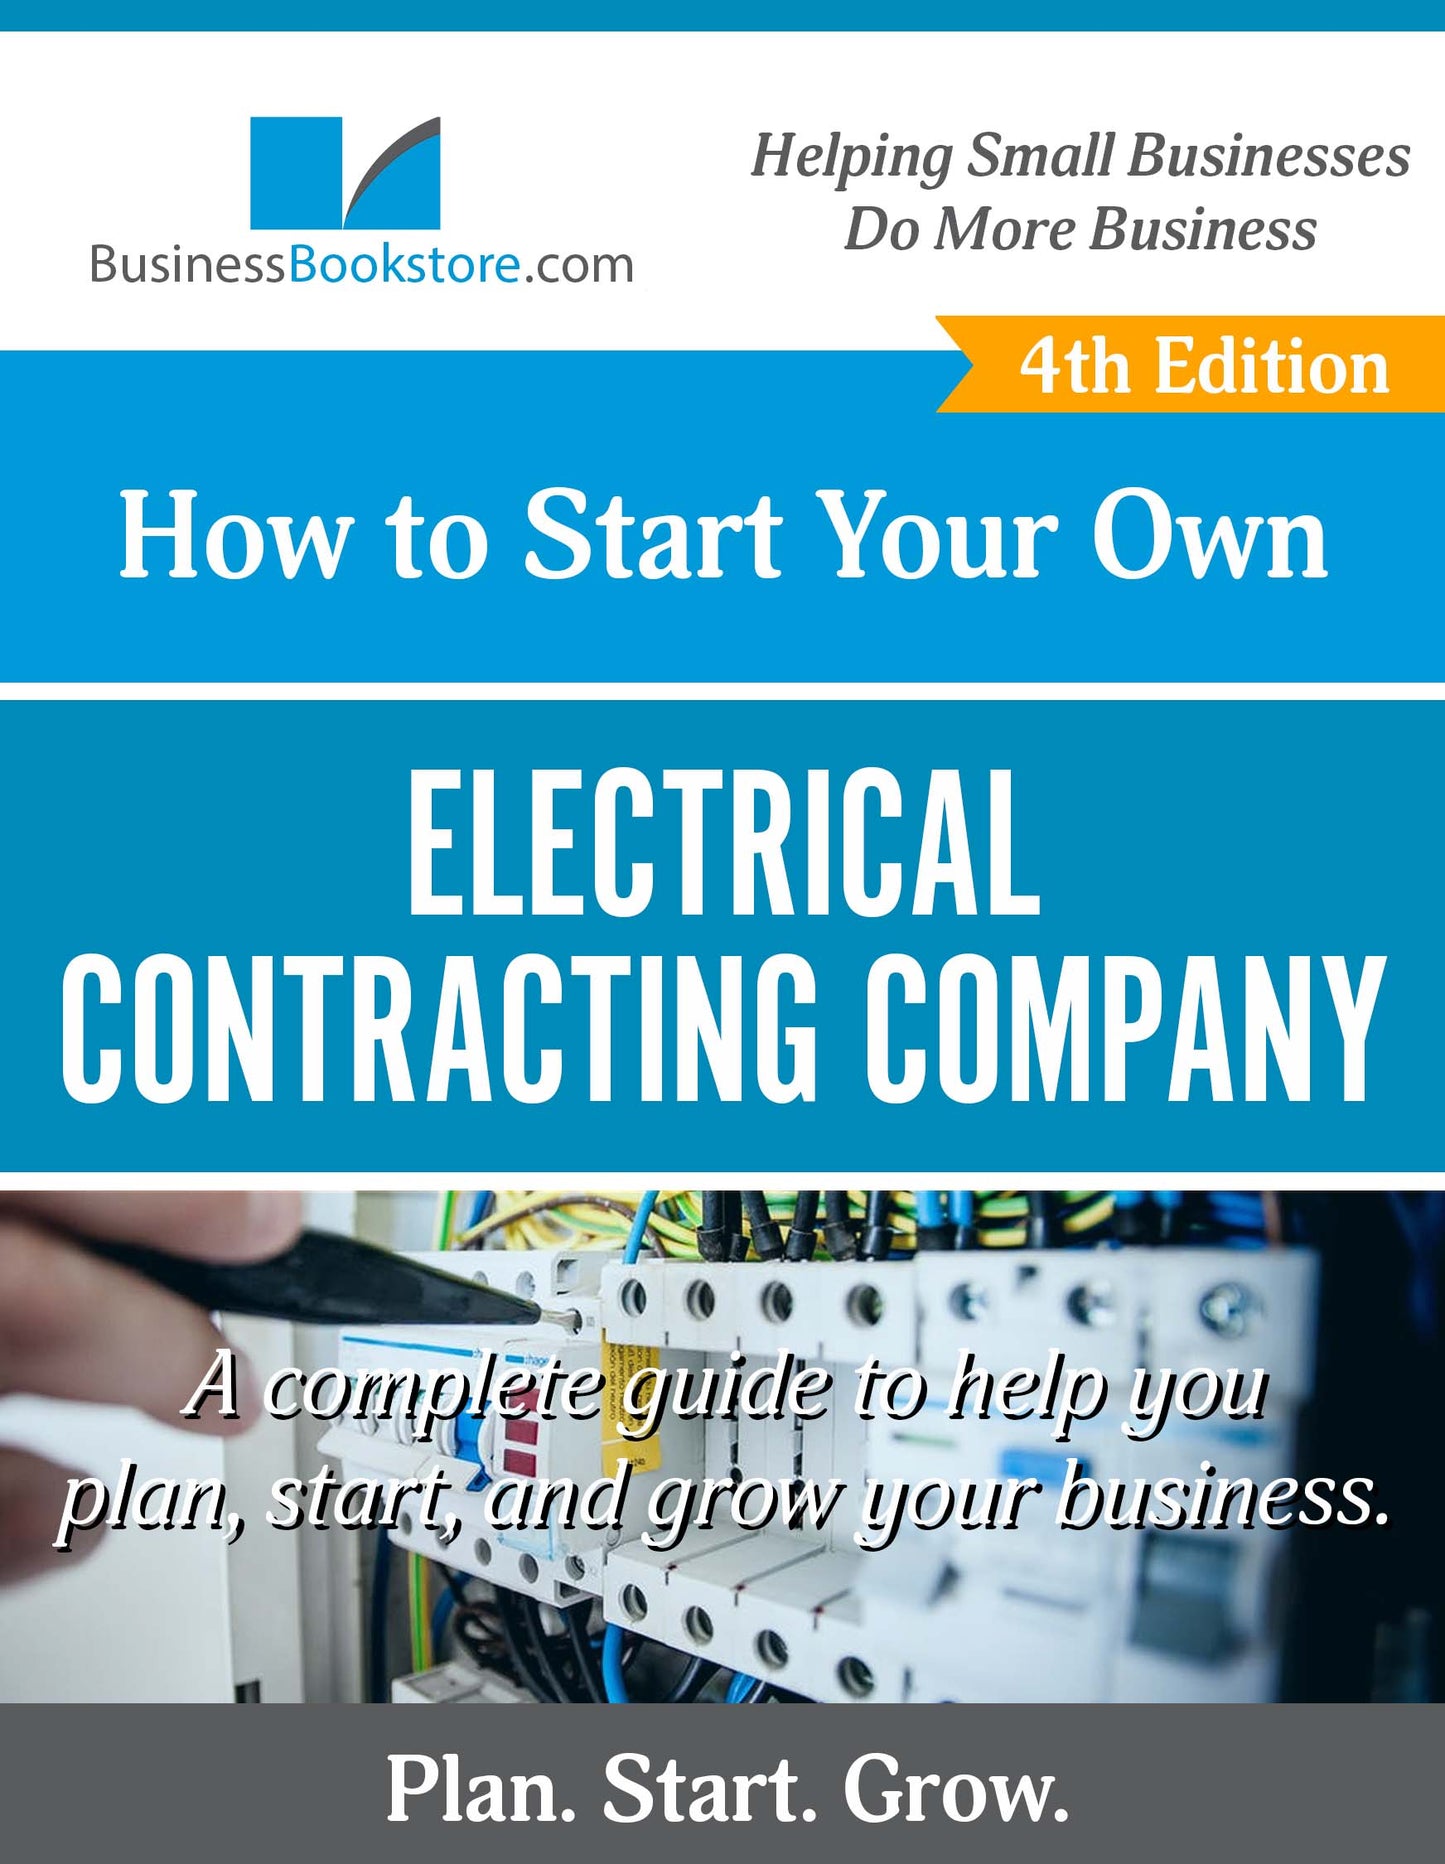 How to Start an Electrical Contracting Company